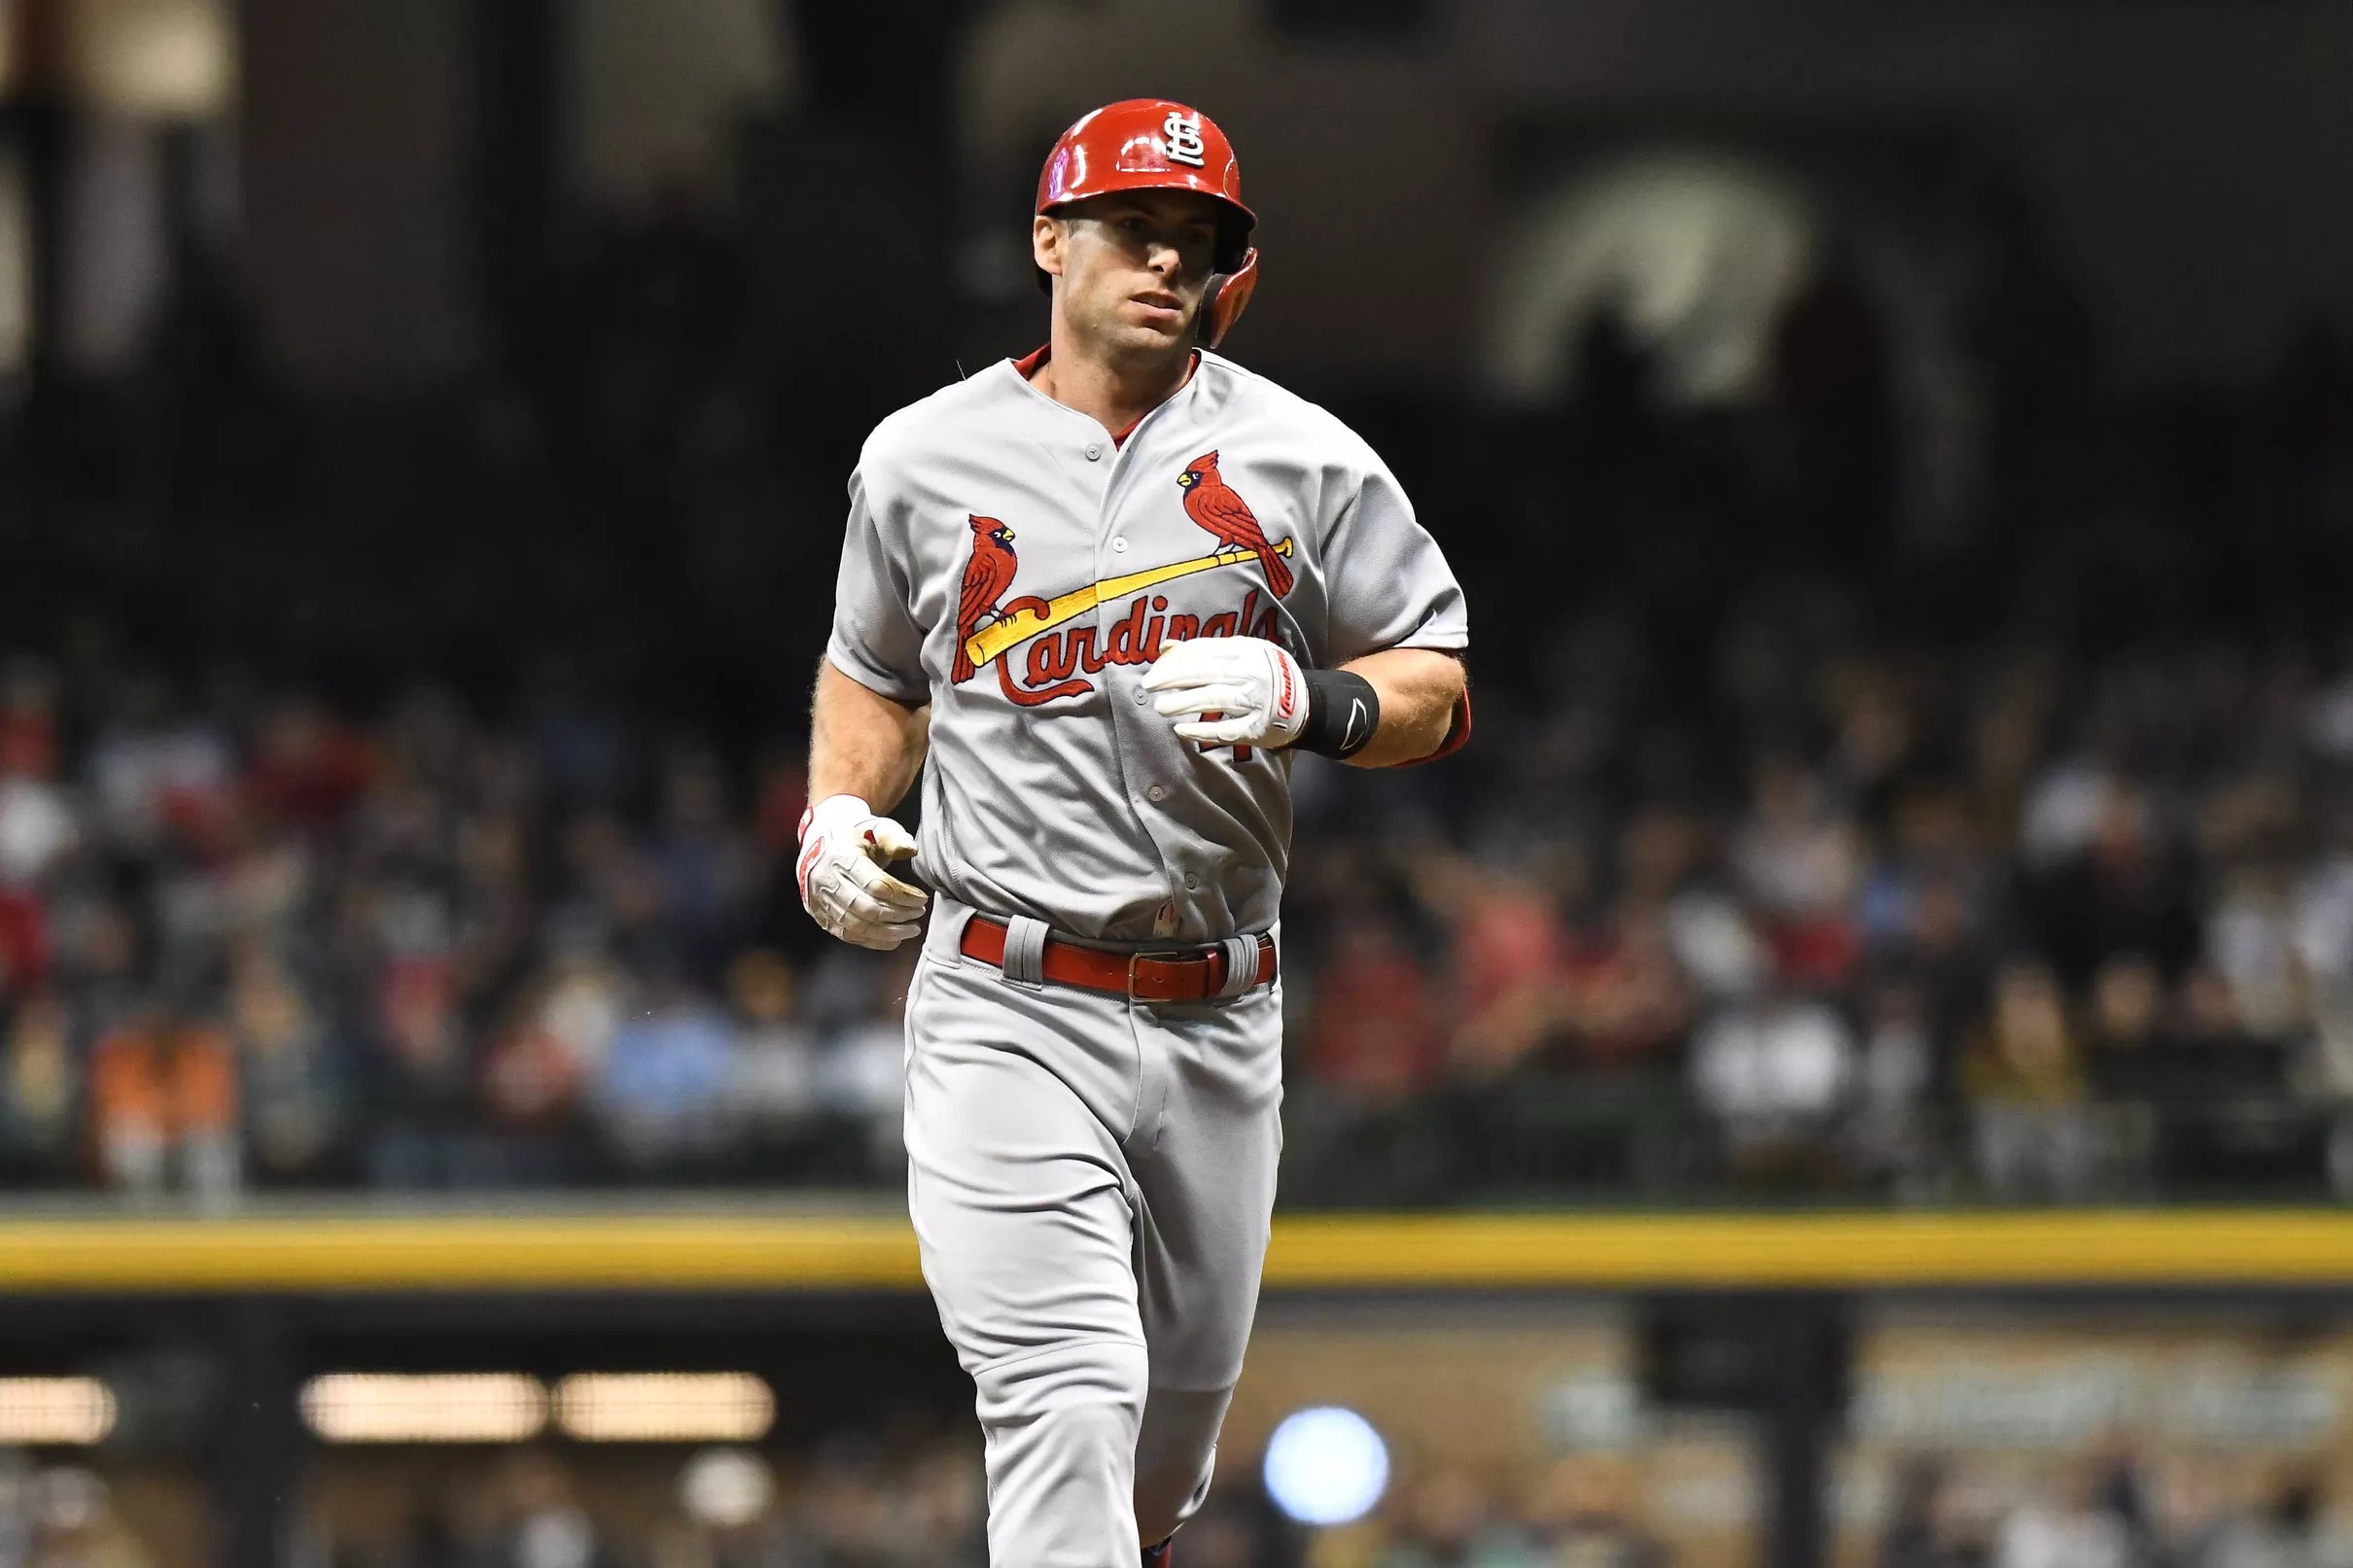 Paul Goldschmidt Hits Three Home Runs, Leads Cardinals to a 95 Win in